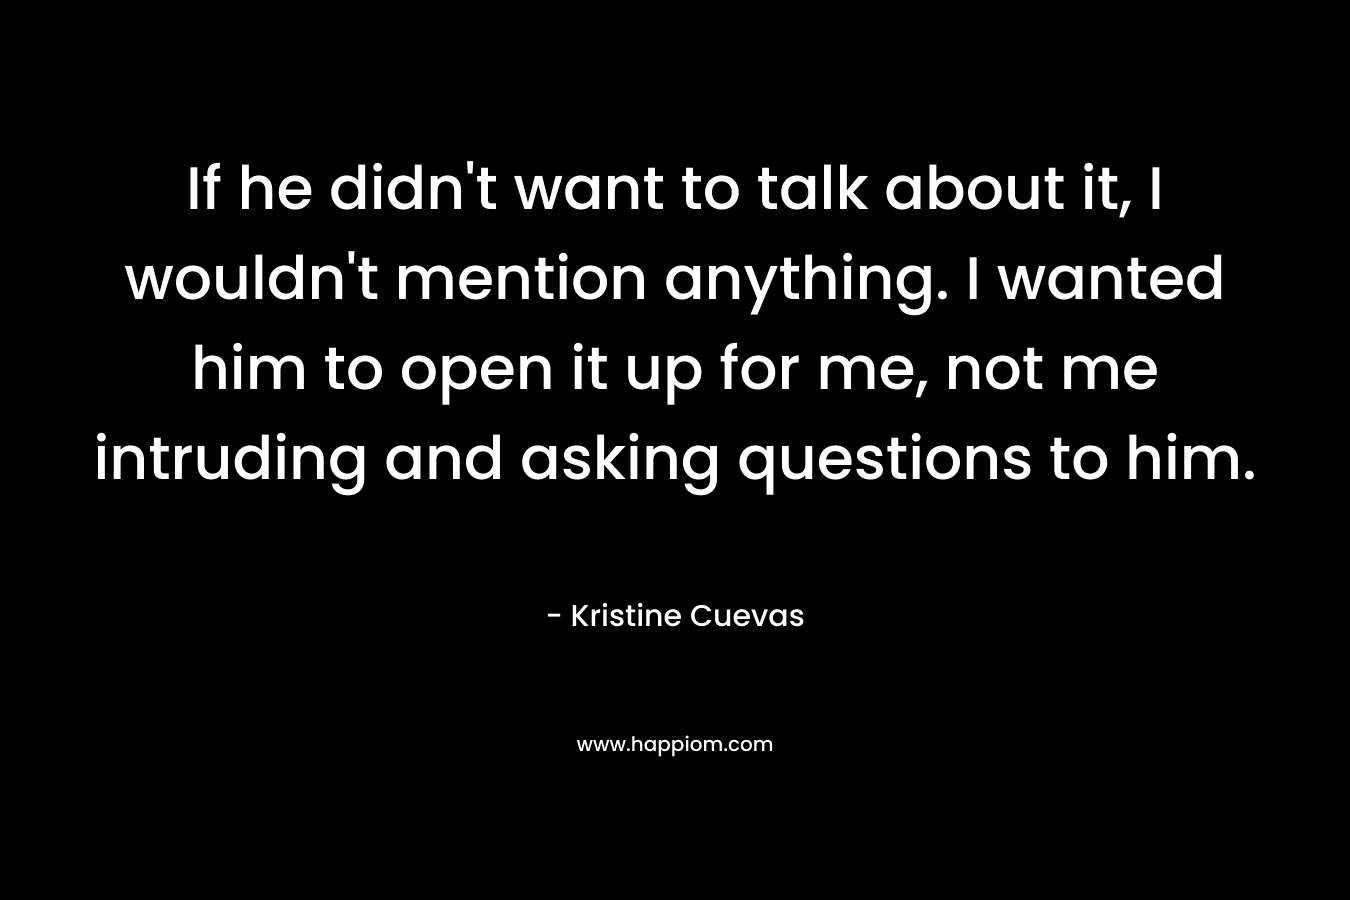 If he didn’t want to talk about it, I wouldn’t mention anything. I wanted him to open it up for me, not me intruding and asking questions to him. – Kristine Cuevas